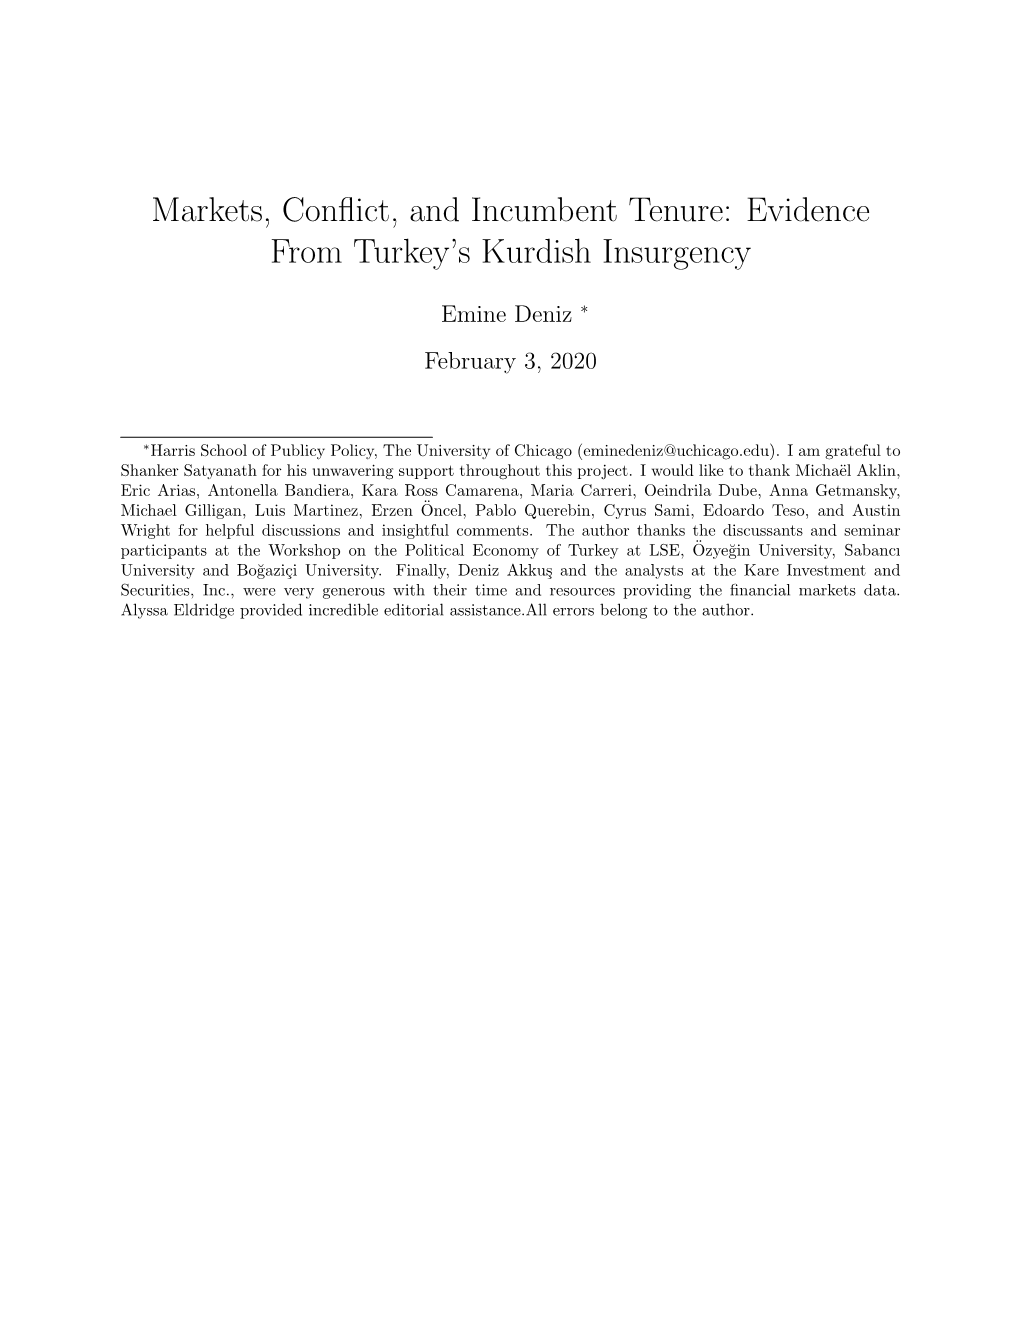 Political Economy of Conflict: Evidence from Turkey